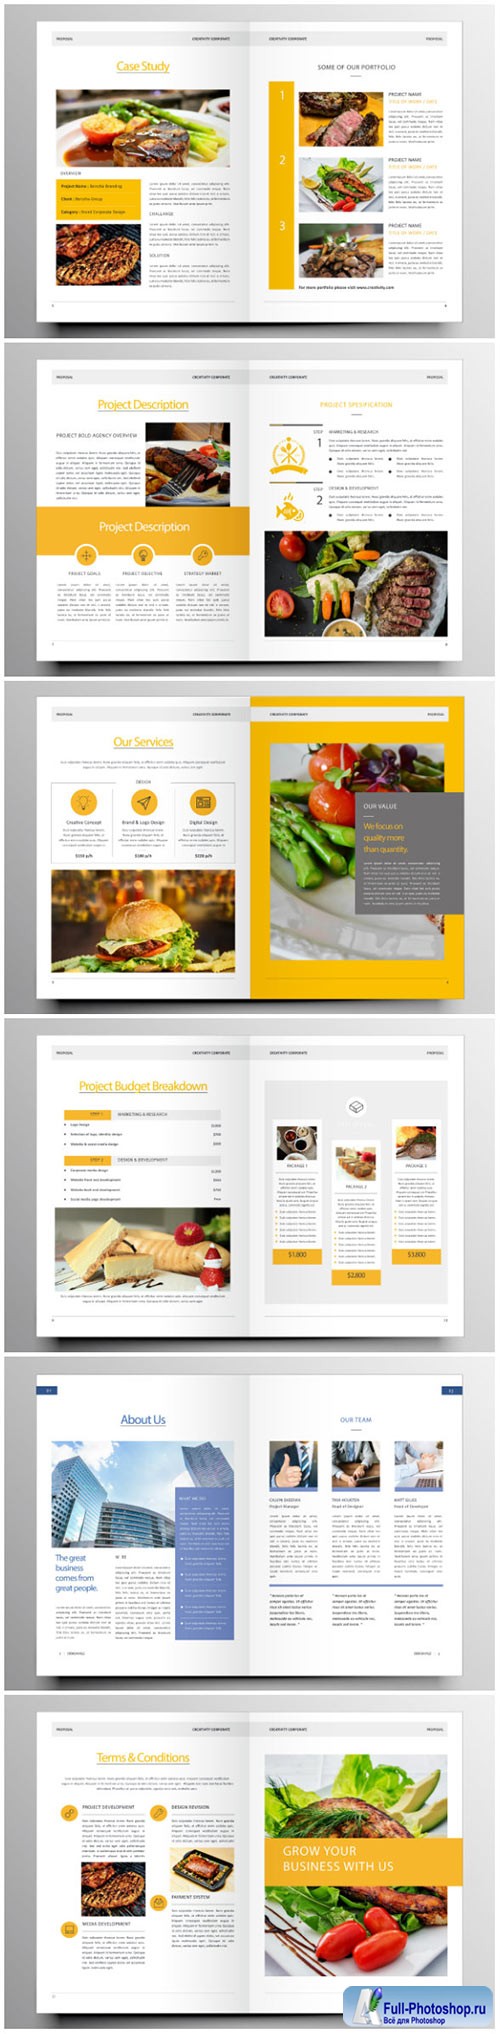 Brochure template vector layout design, corporate business annual report, magazine, flyer mockup # 195